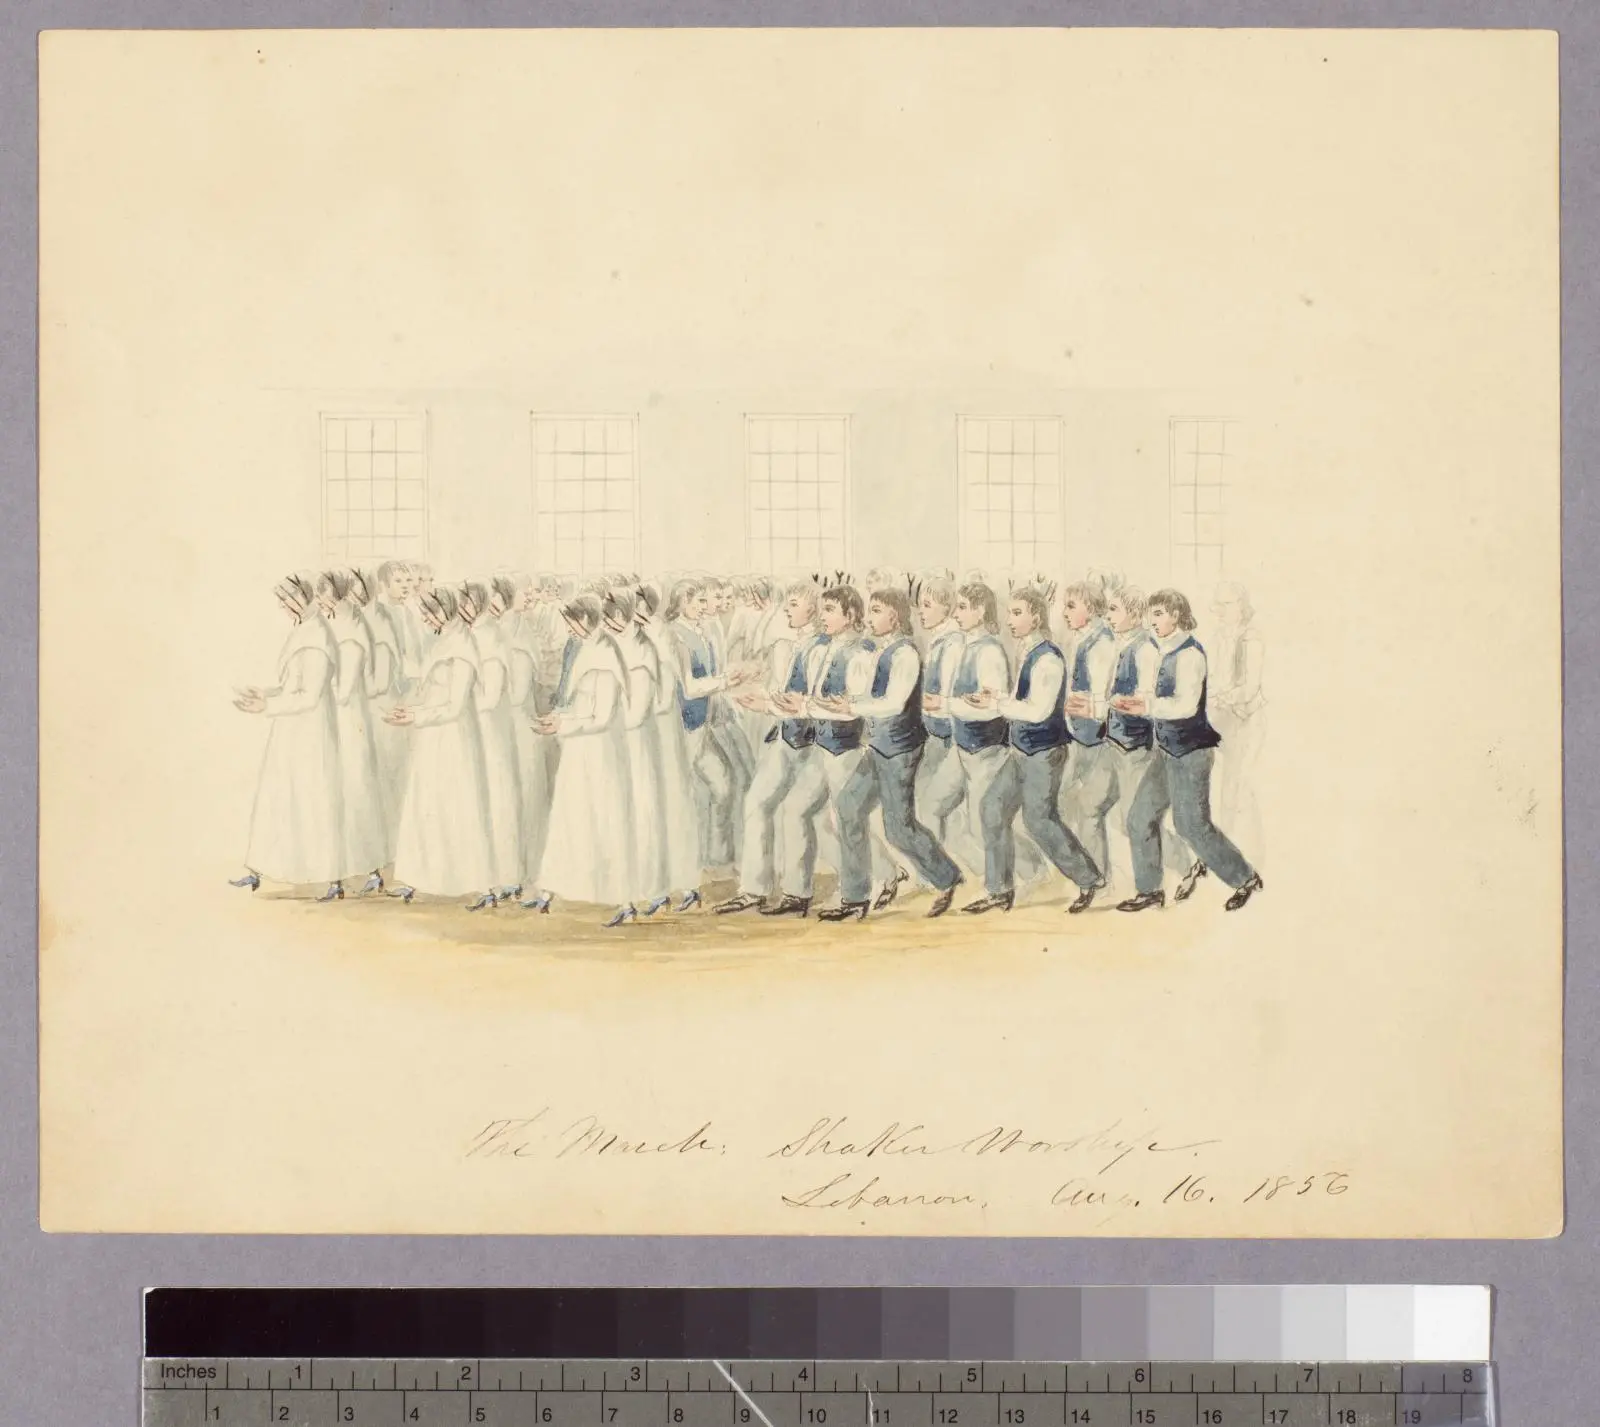 Inside a Shaker meeting house; men and women in separate ranks during the square order formation of a religious dance.